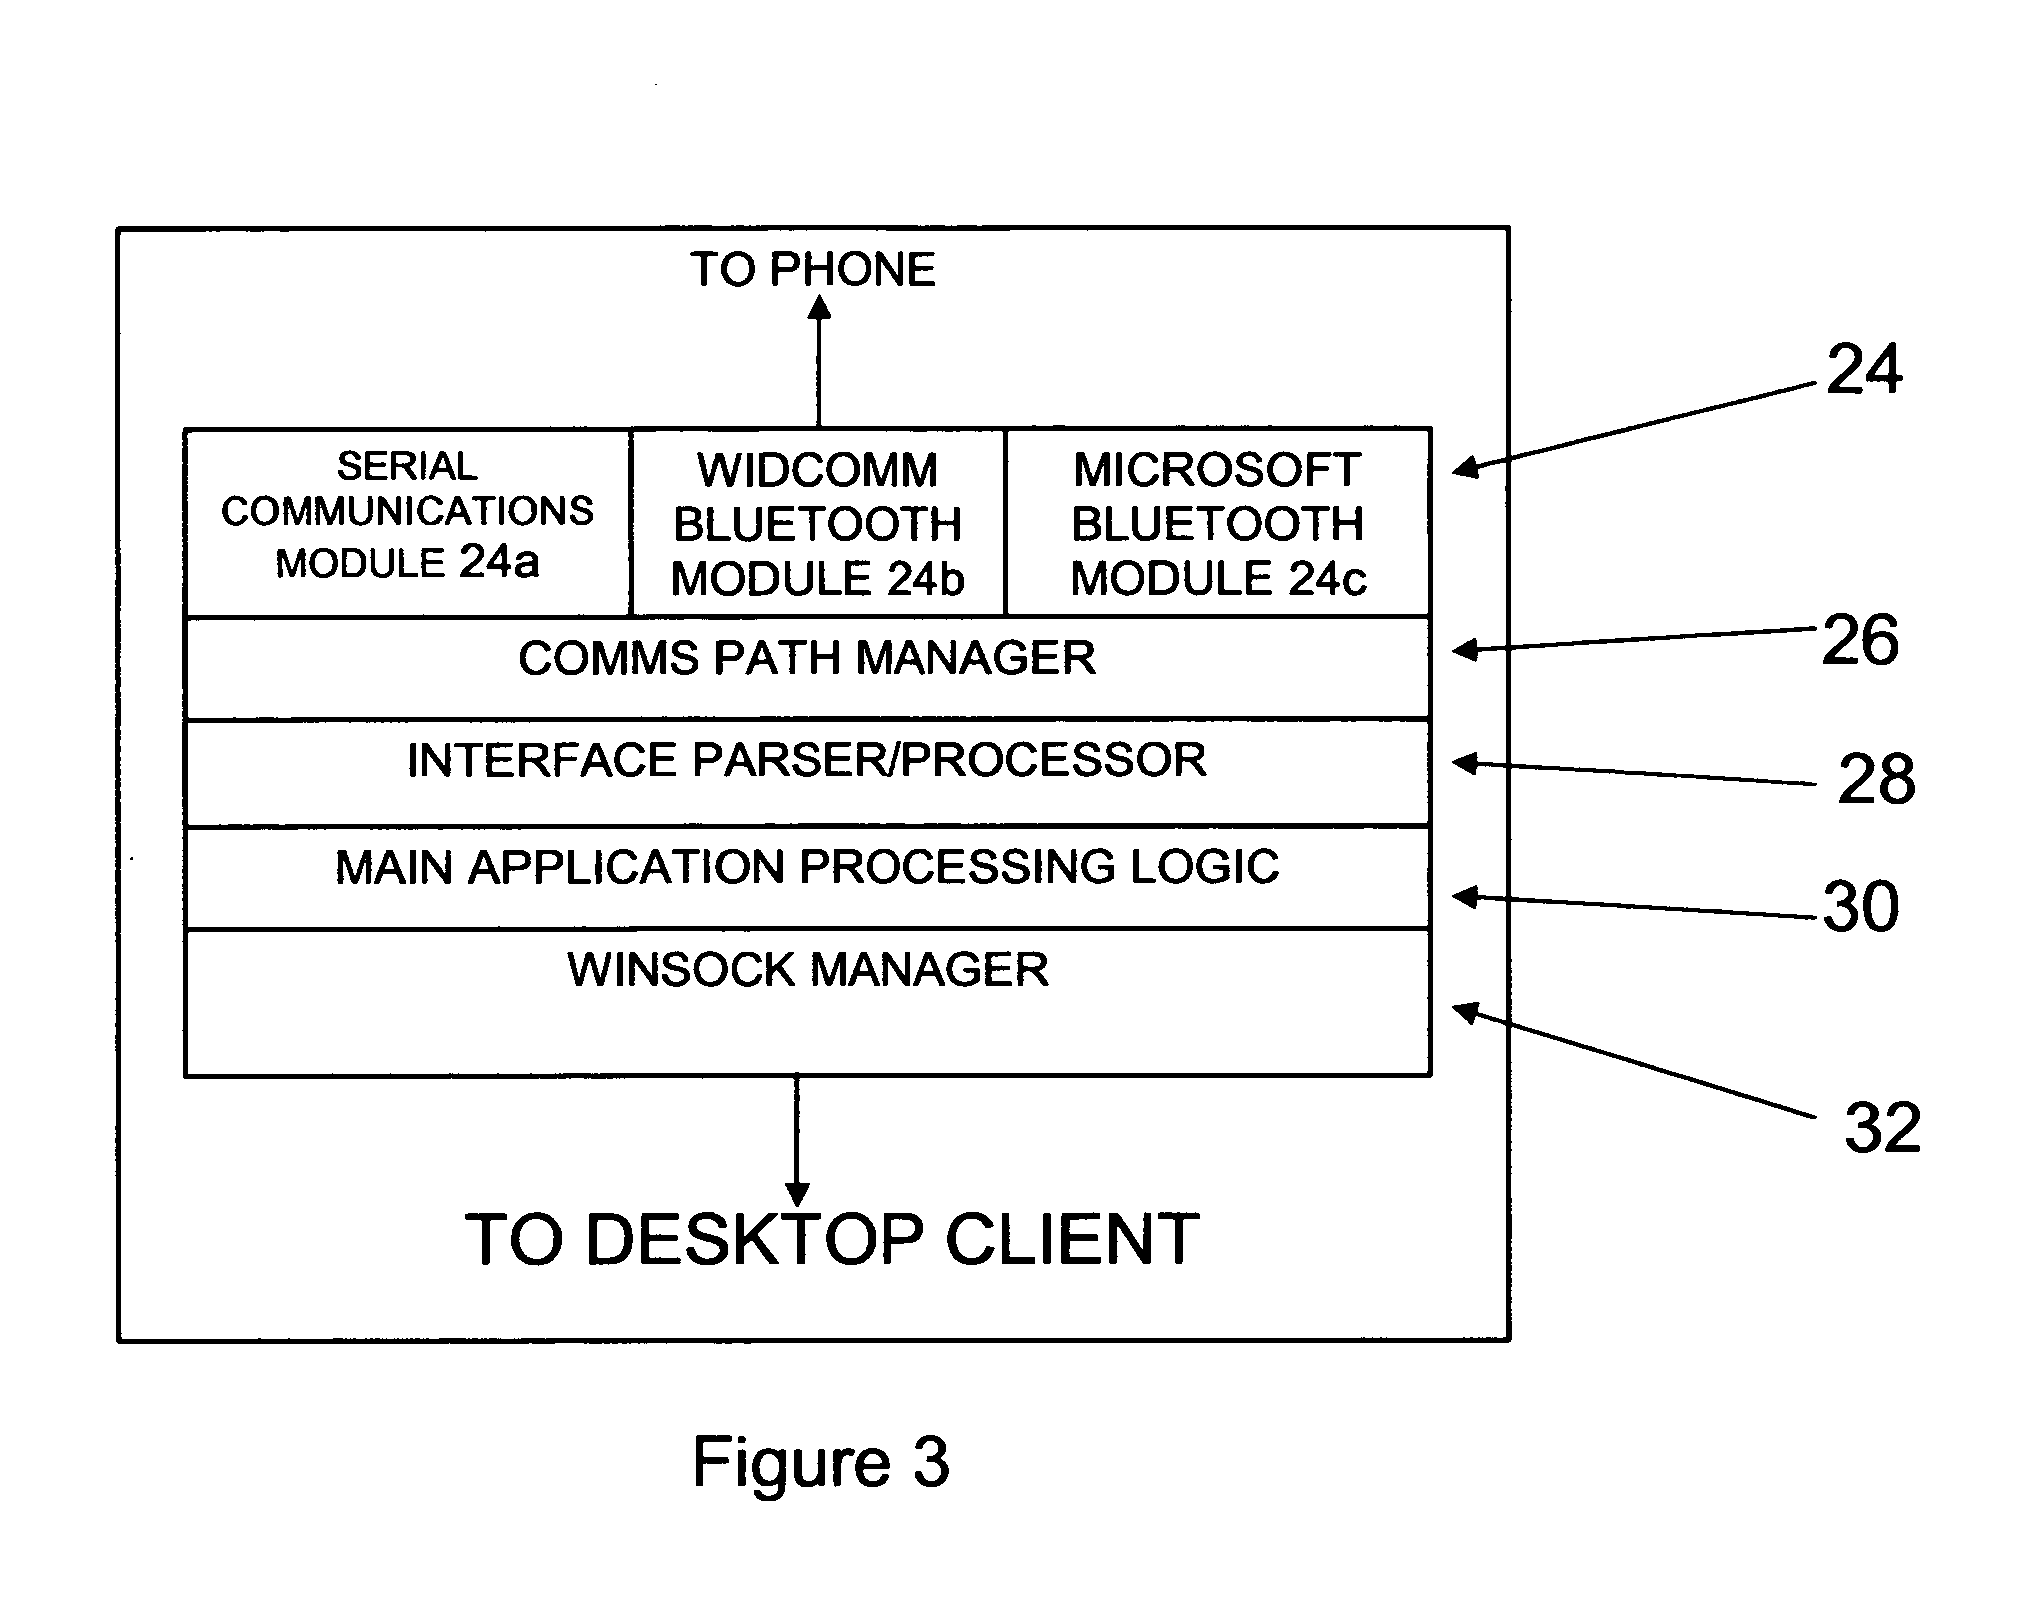 Method of indentifying devices in mobile and desktop environments